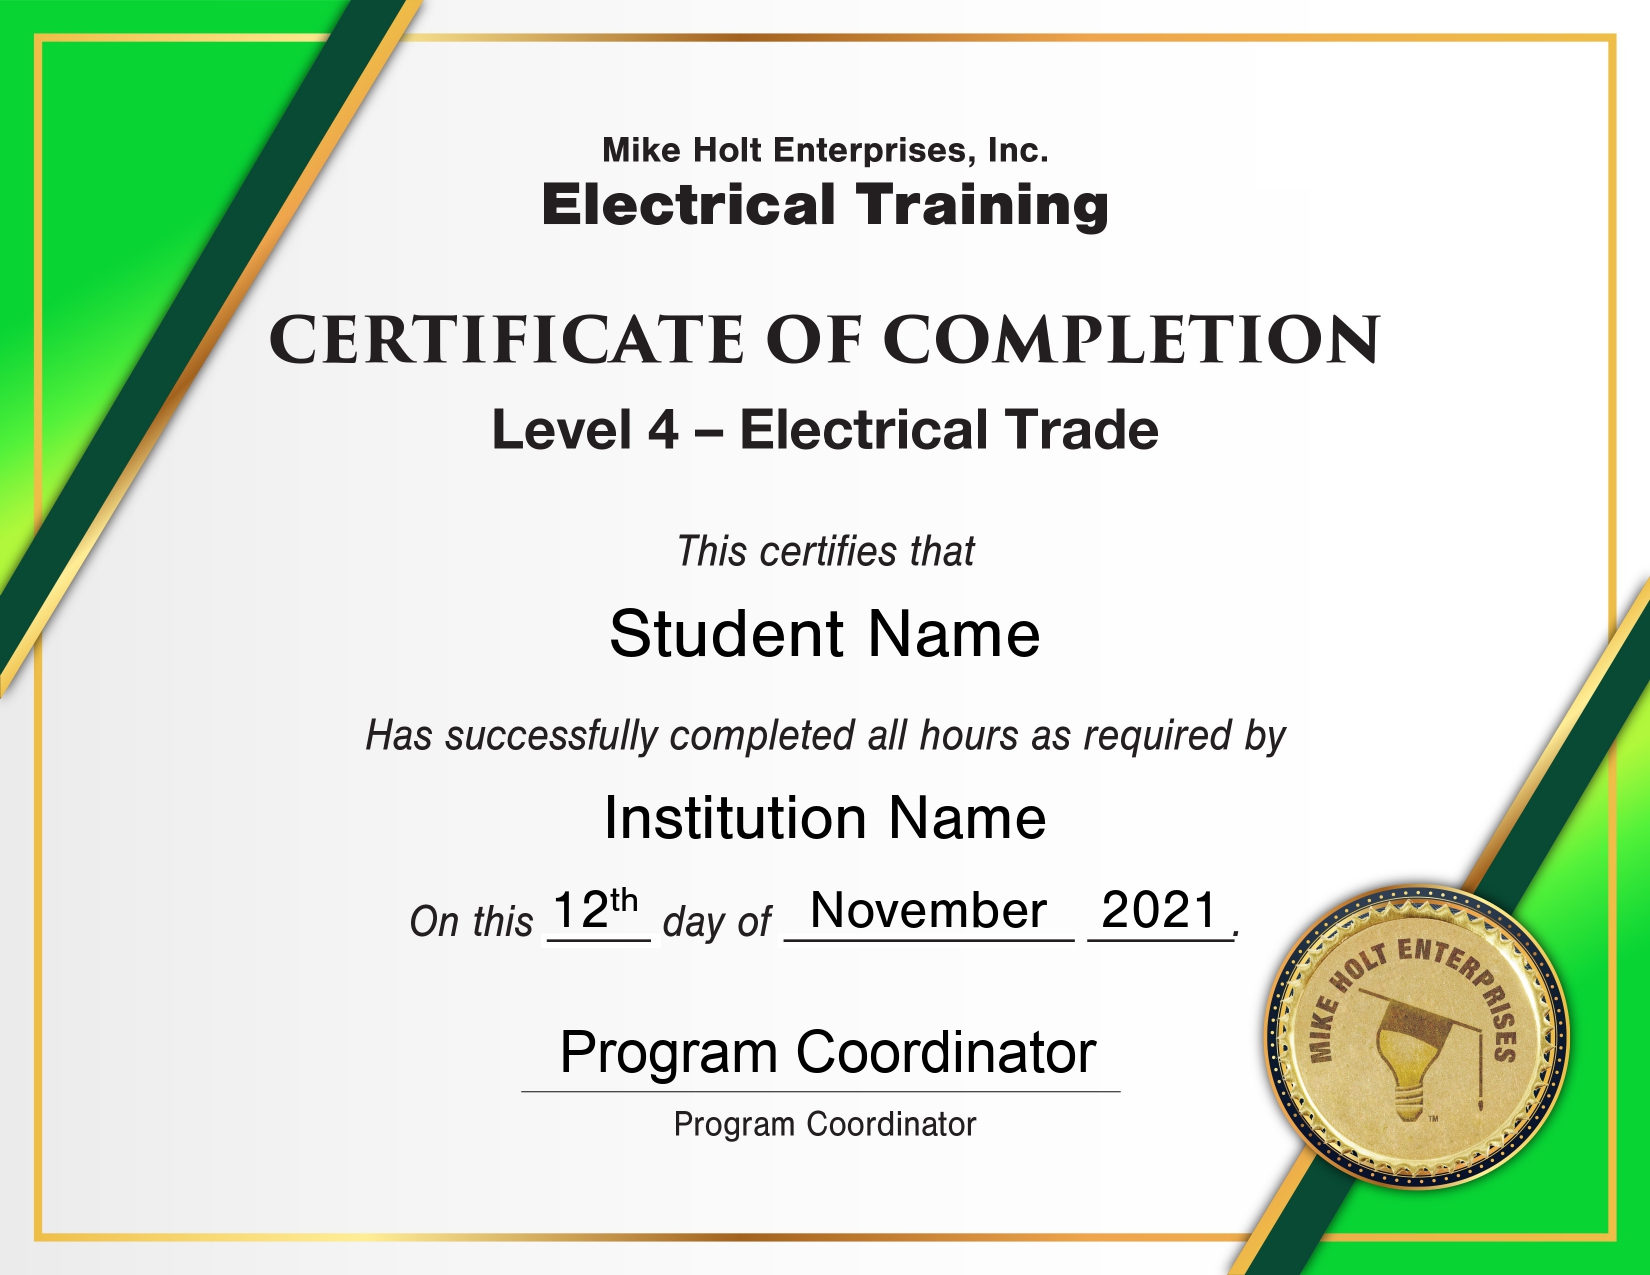 Certificate of Completion for Level 4